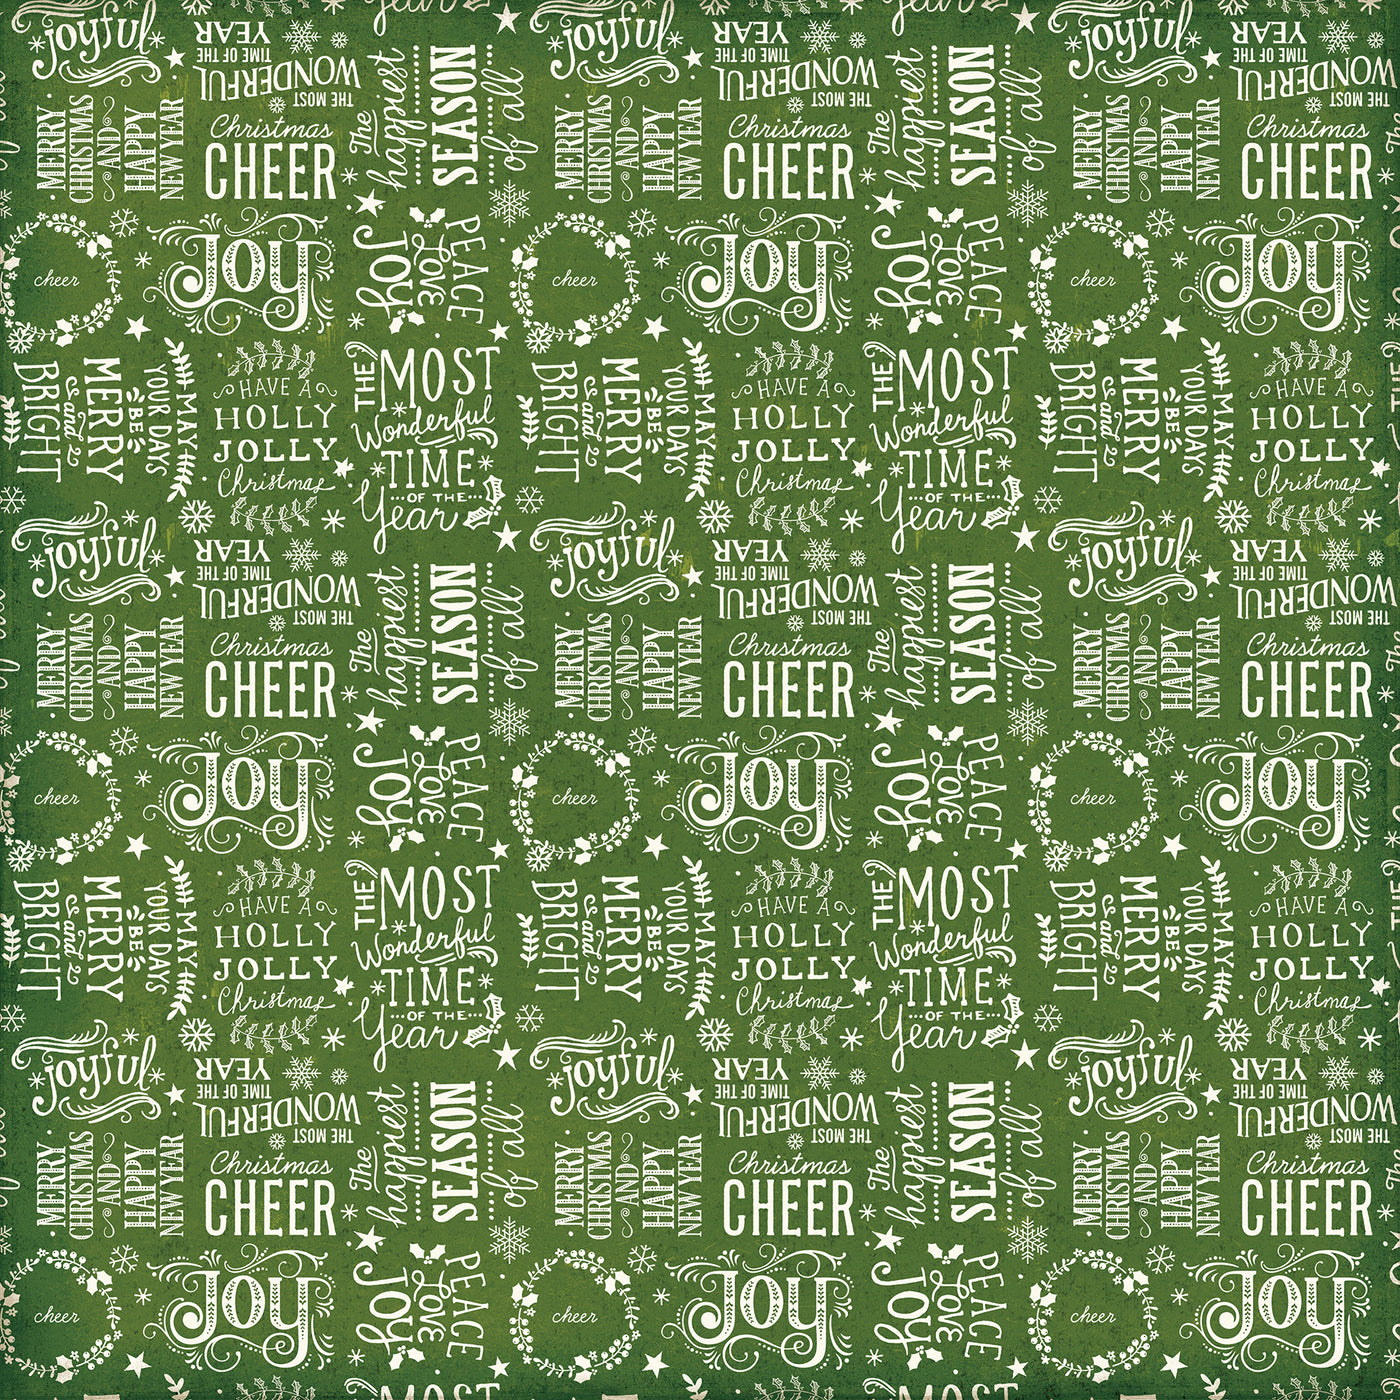 Side A - Christmas words and phrases on a green background